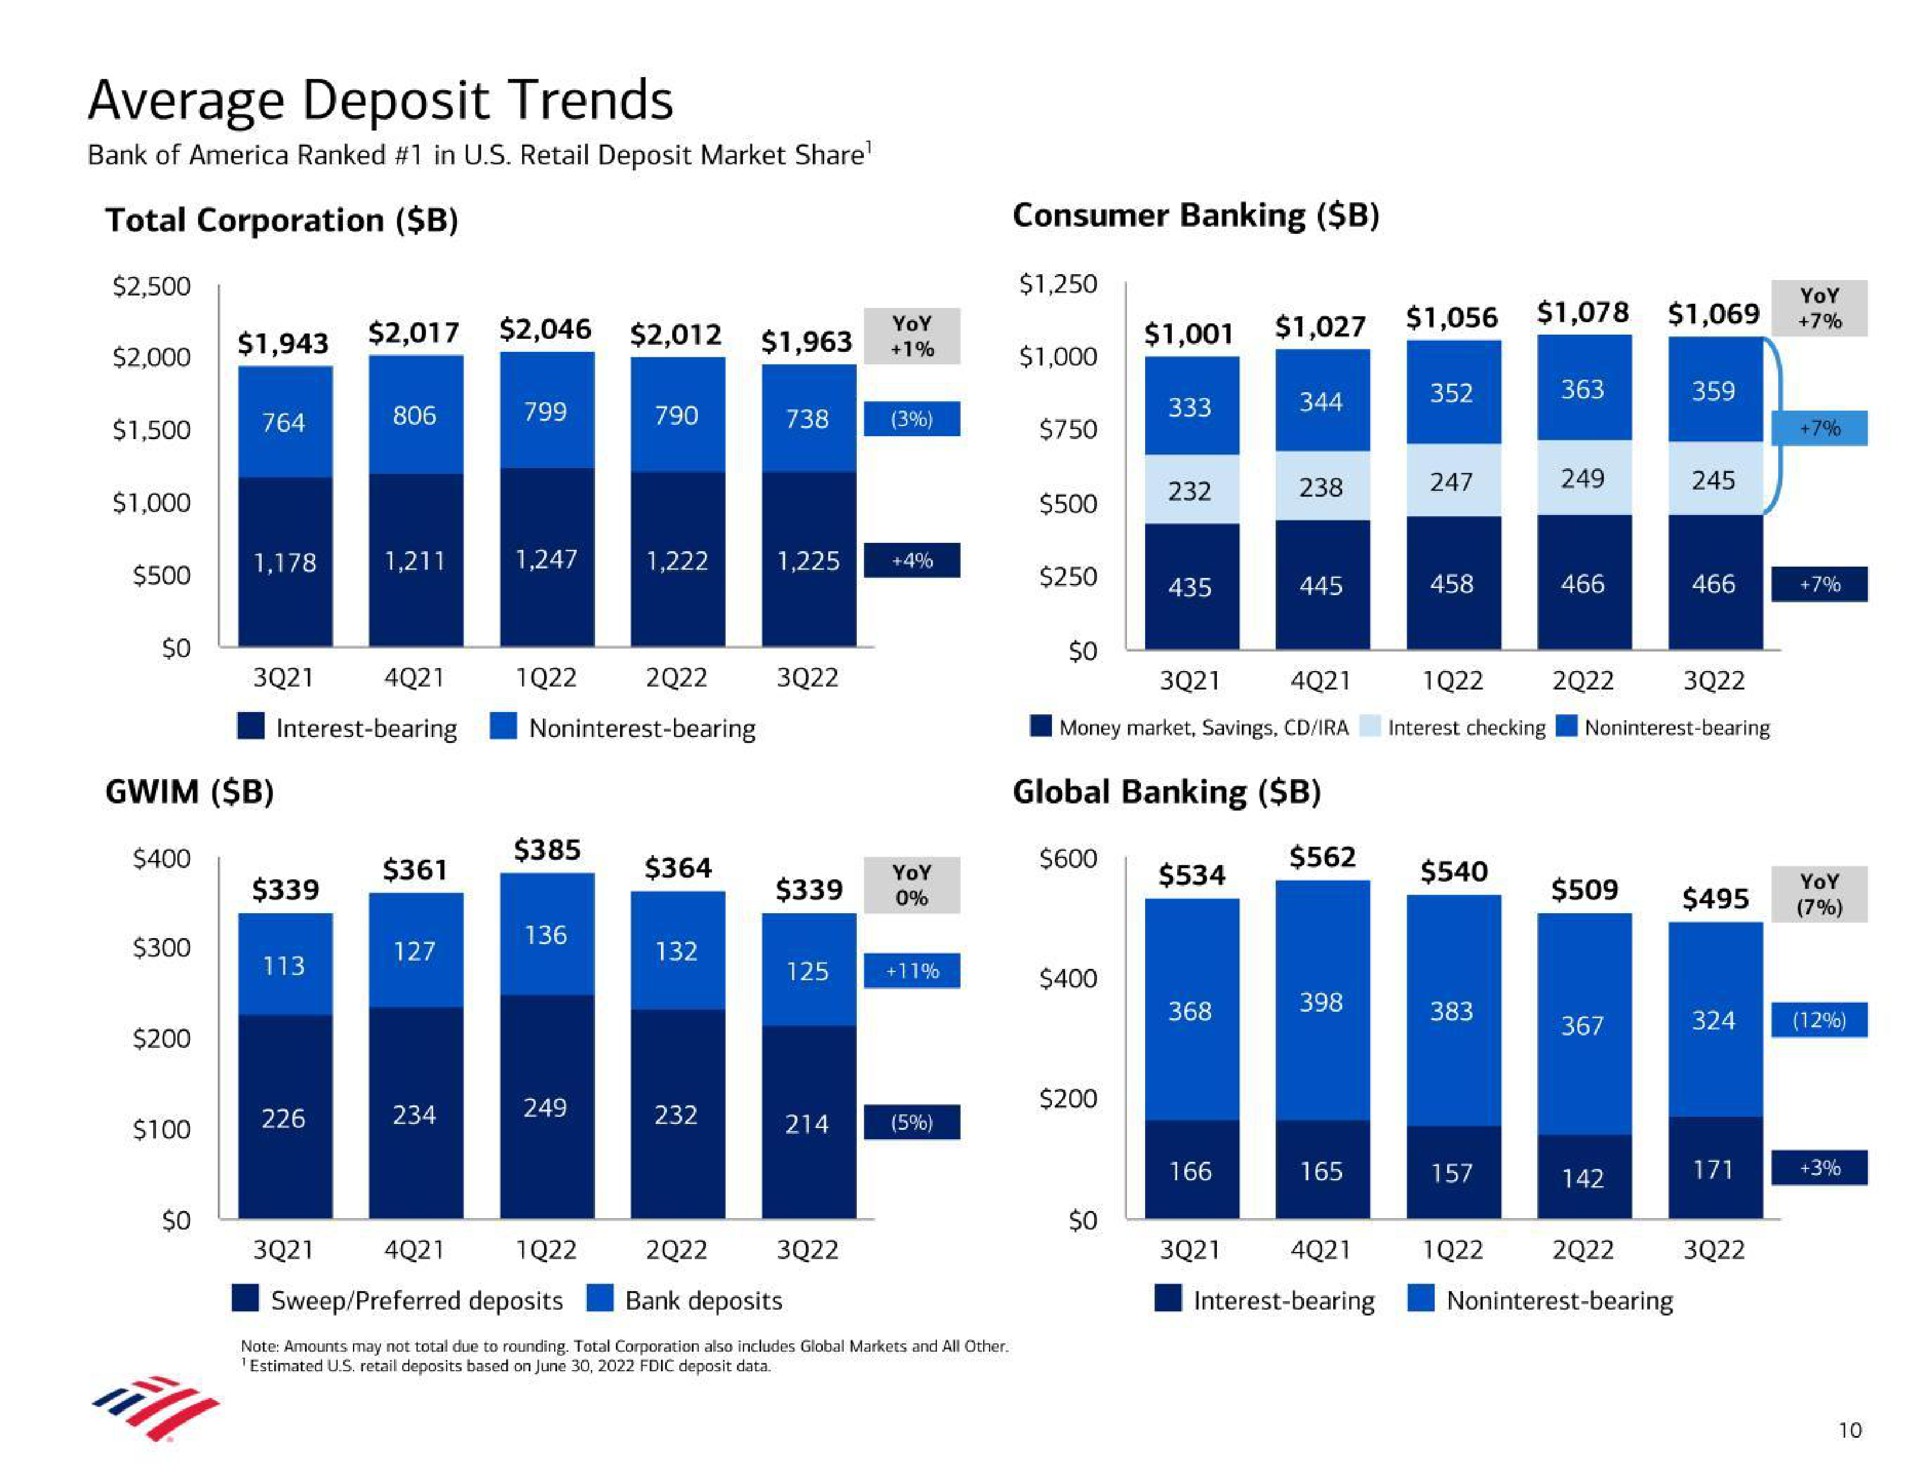 average deposit trends total corporation consumer banking sie eer yoy global banking yoy so a | Bank of America